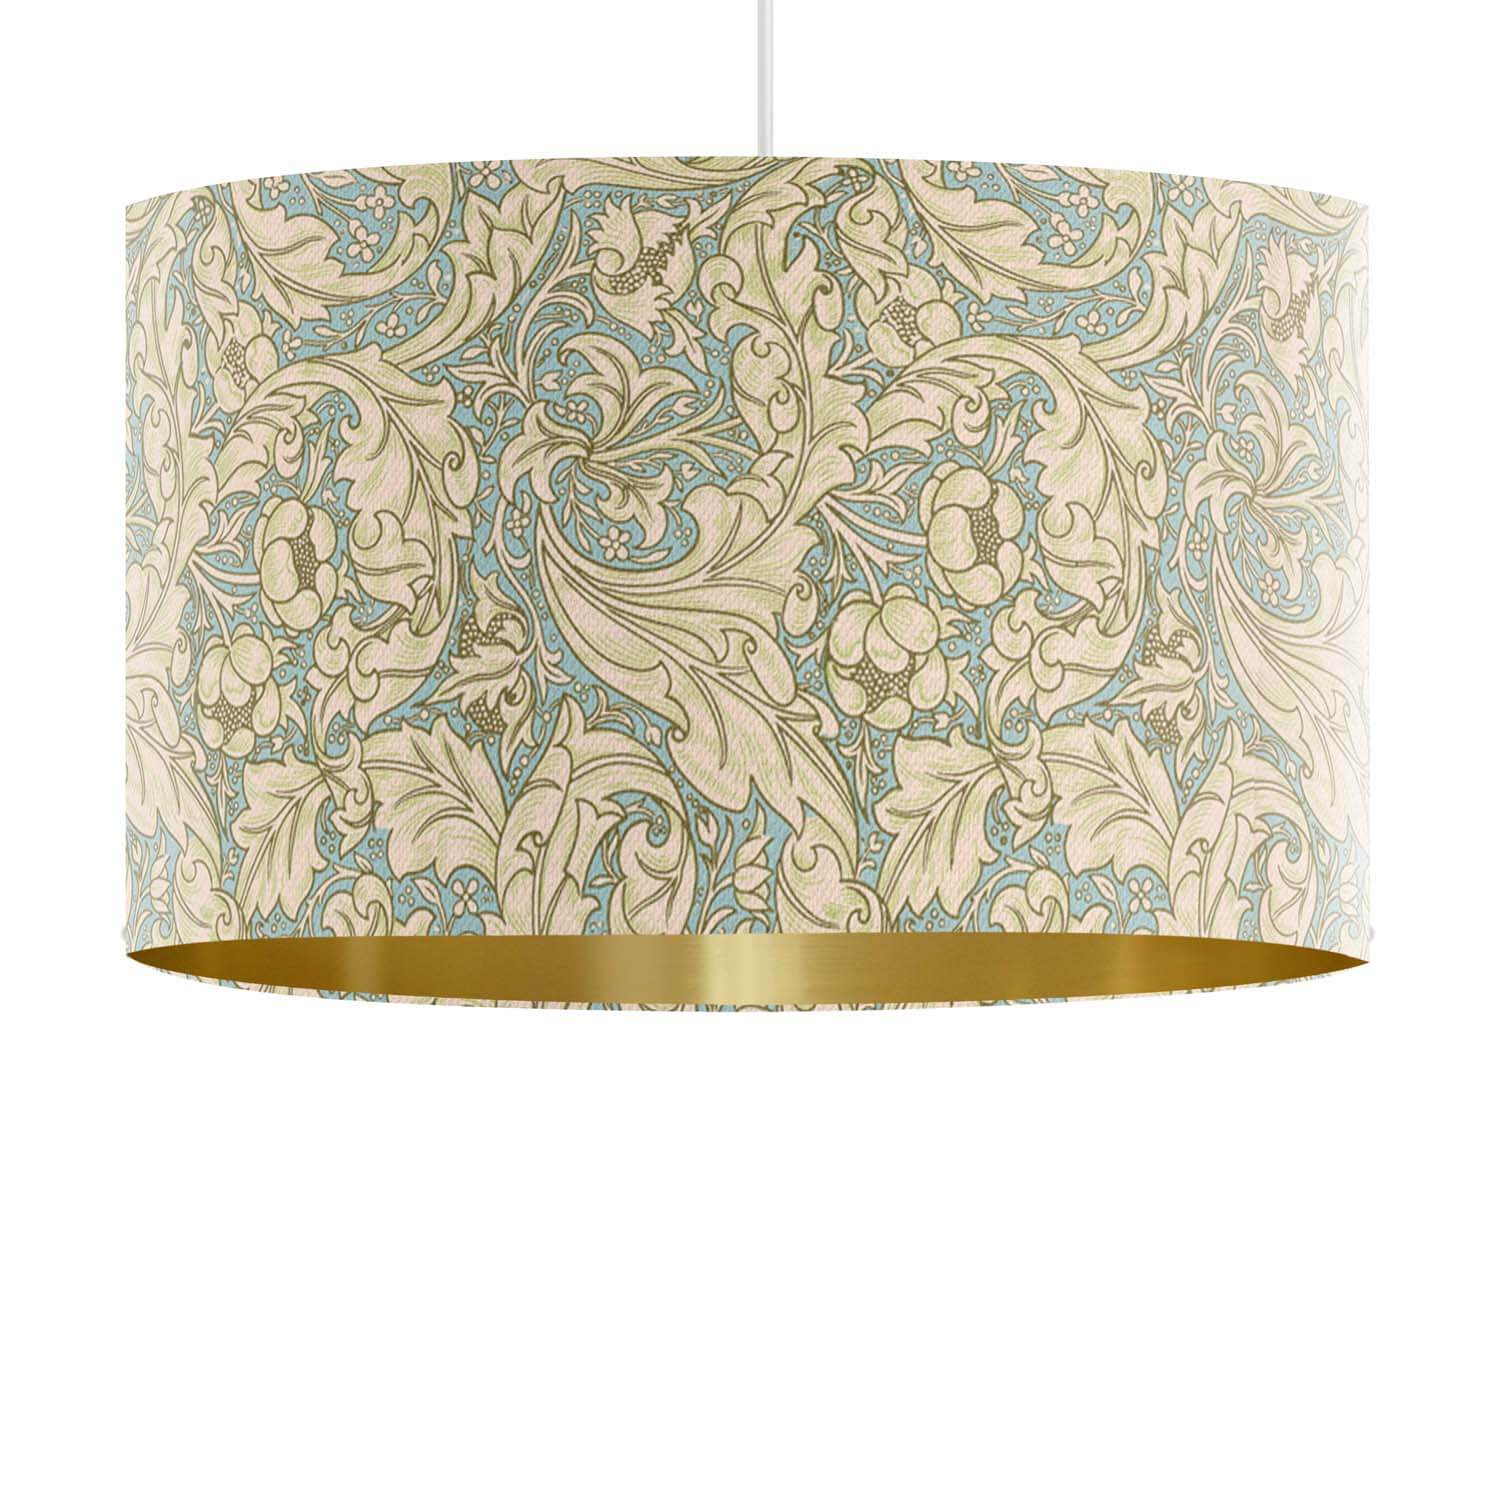 Bachelor Buttons - William Morris Gallery Lampshade